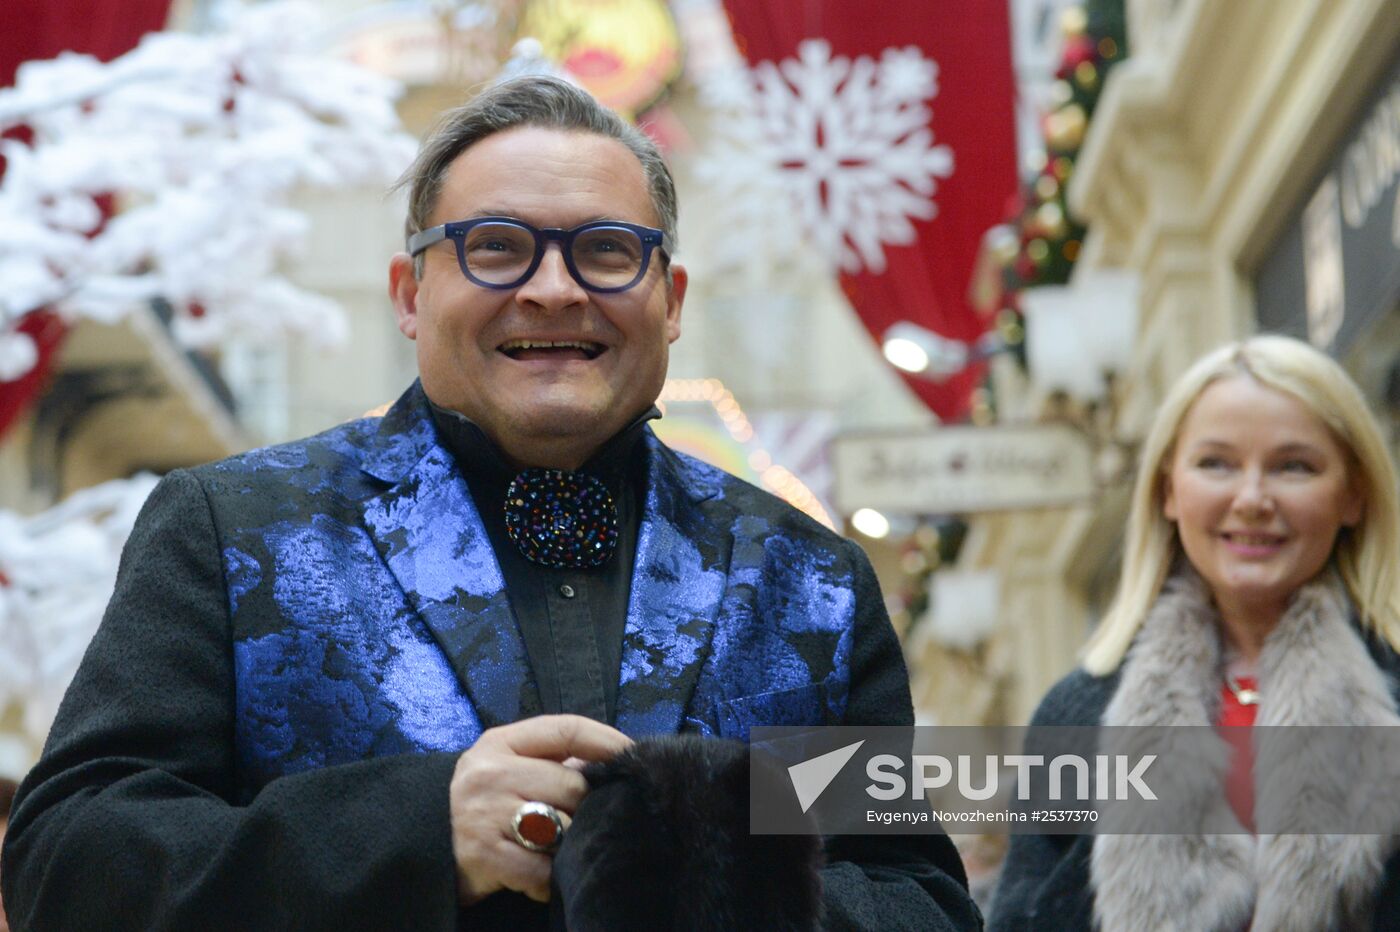 Celebrity Wardrobe exhibition opens in Moscow